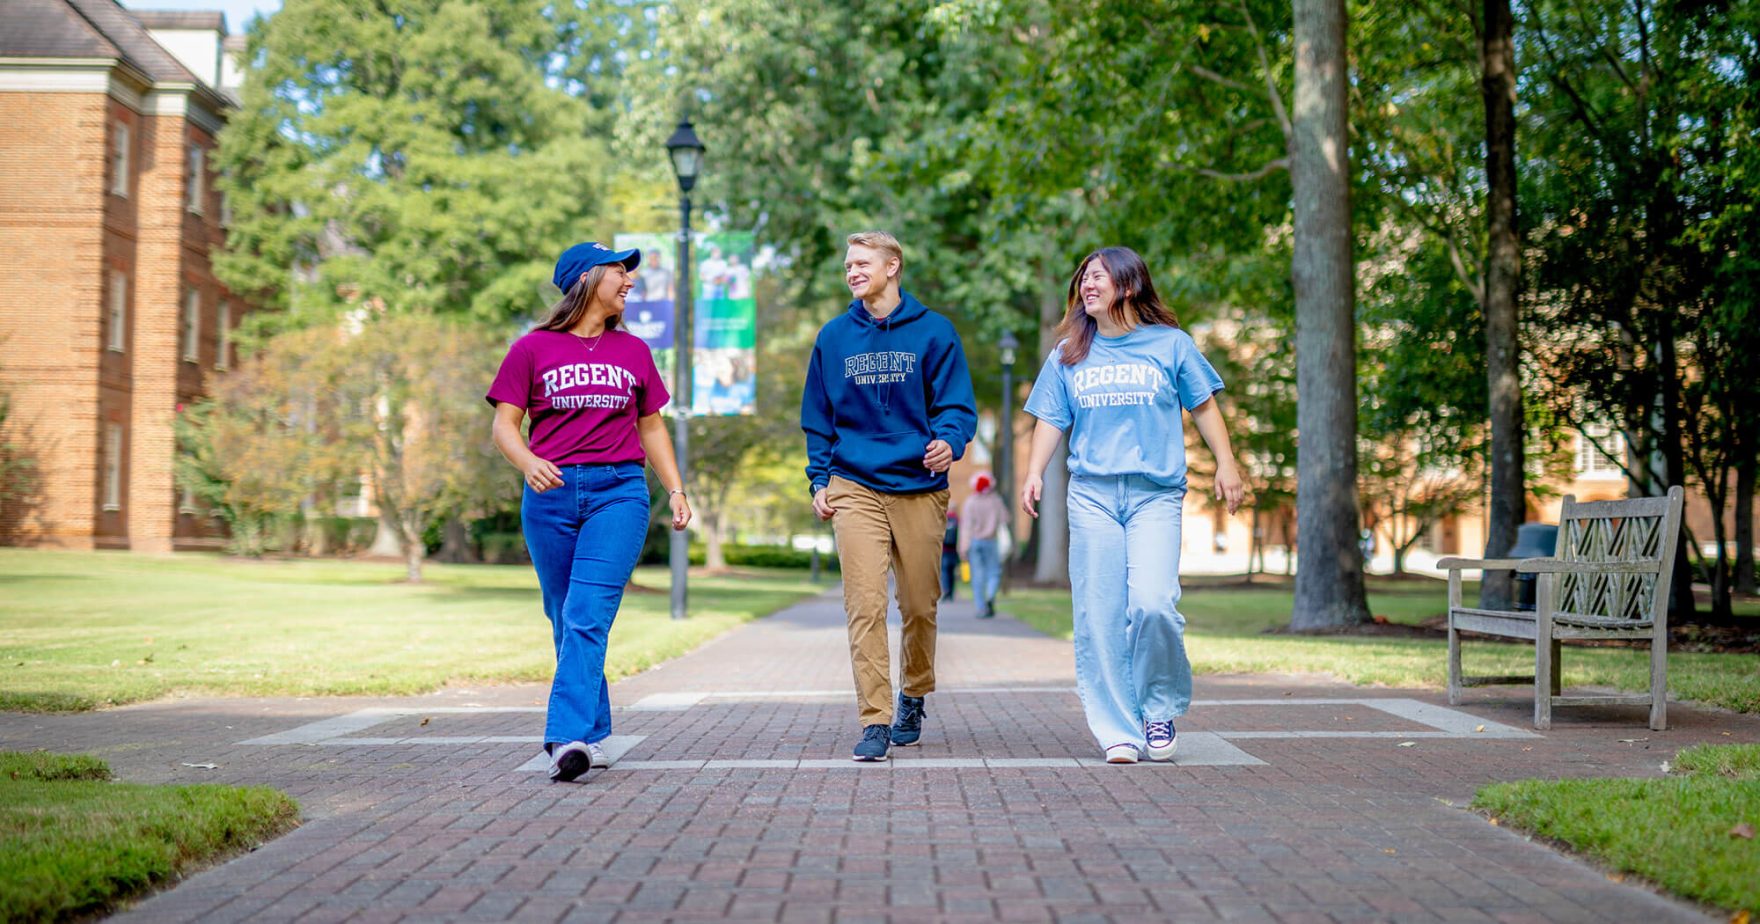 Regent University Recognized as one of Money’s Best Colleges in America